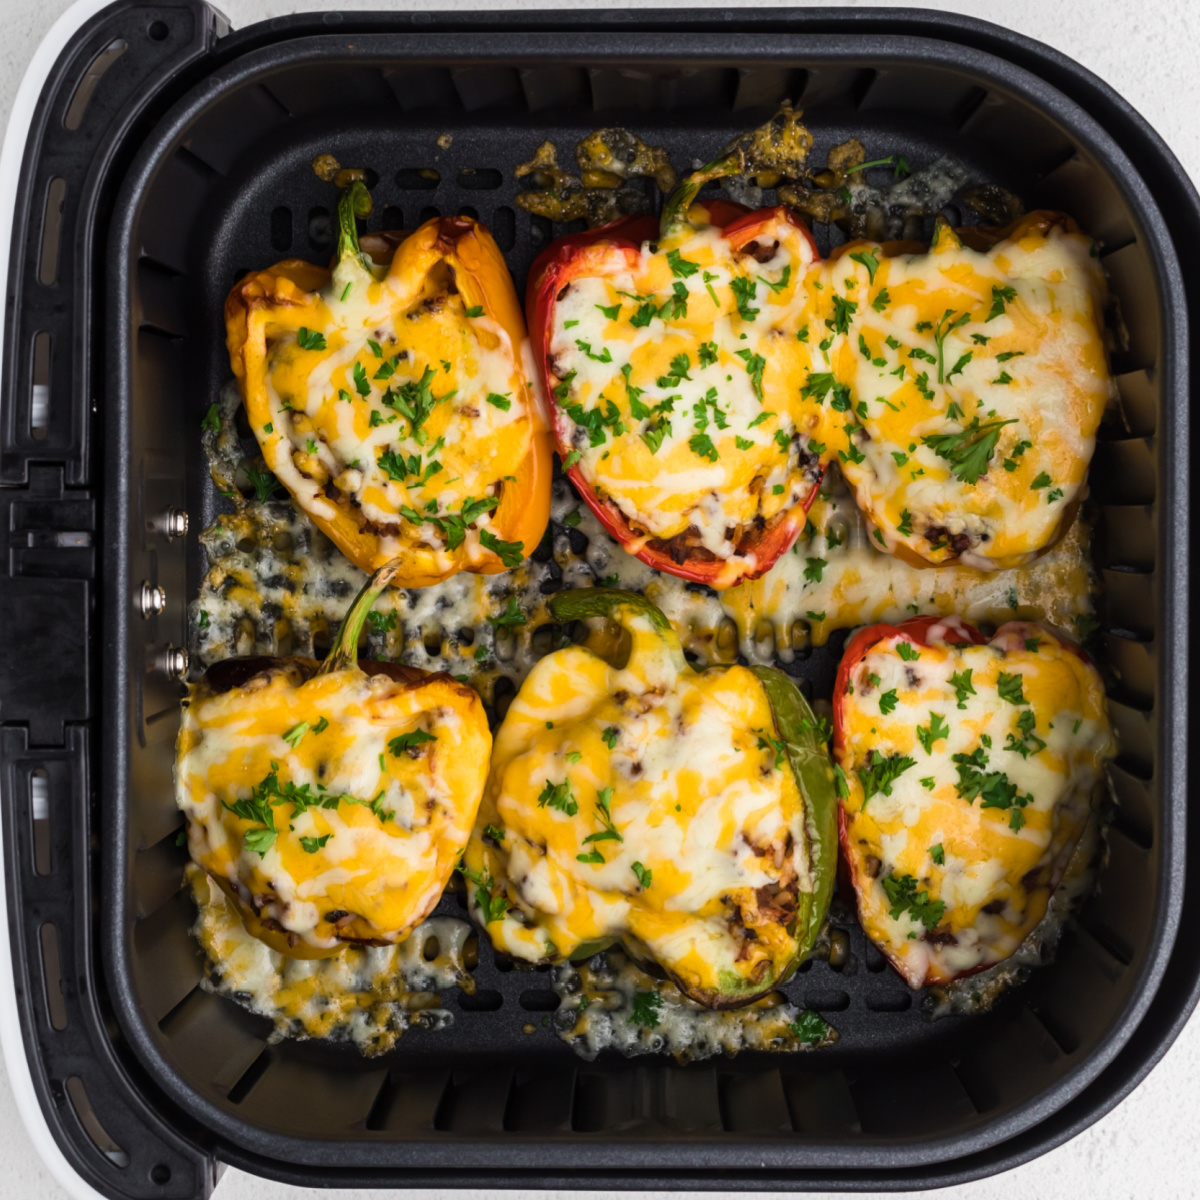 Stuffed peppers in the basket of the air fryer covered in cheese and topped with fresh parsley.